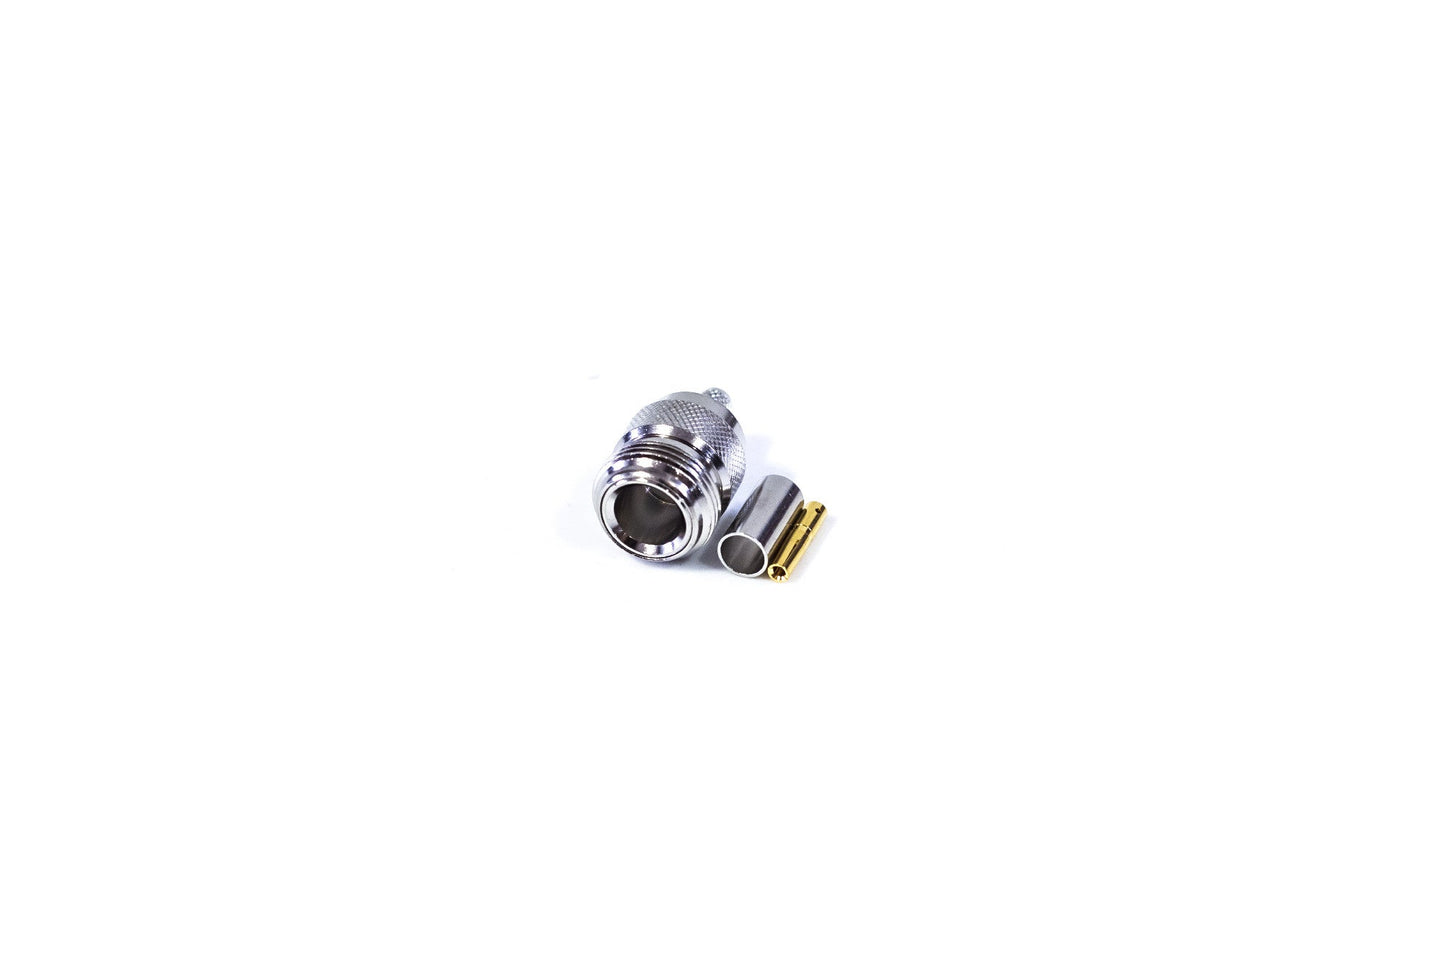 Acconet N-Type (Female) Connector for ARF195 Cable - Vice-Tech